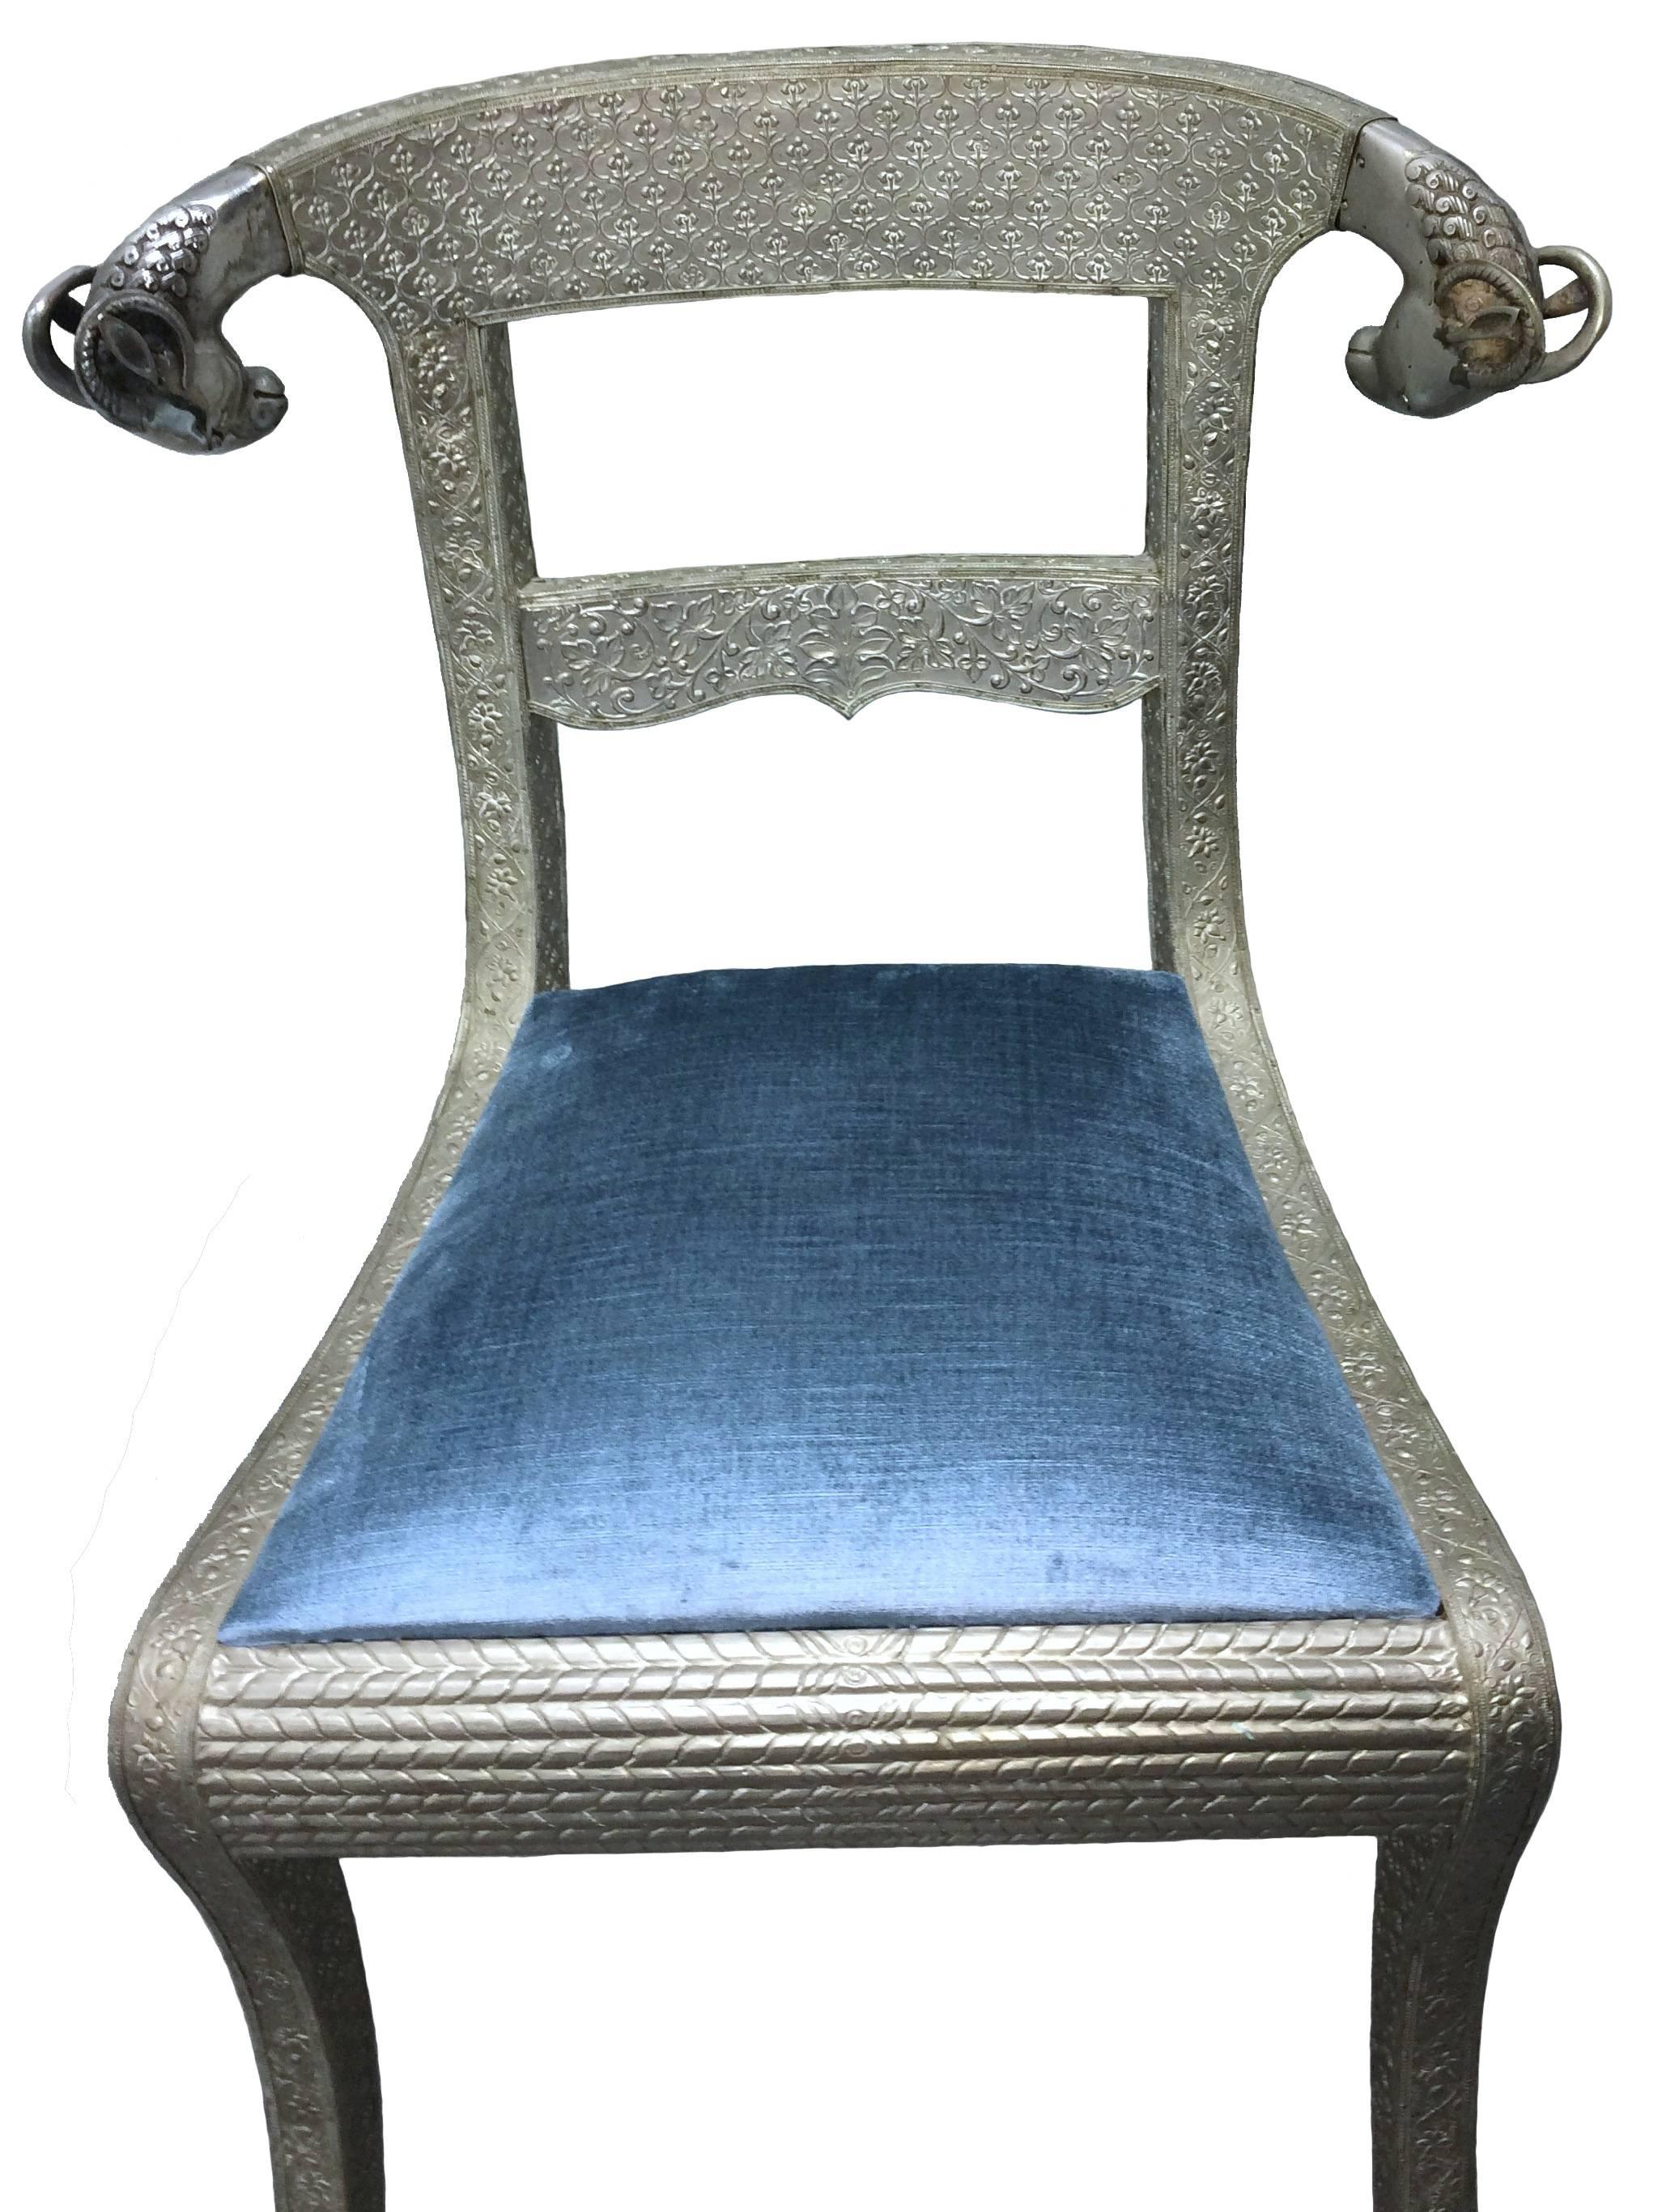 Mid-Century Indian side chair. Repoussé silver tin over wood with detailed ram's head finals. Curved back rail design. Upholstered in blue silk/velvet fabric. Seat, 18